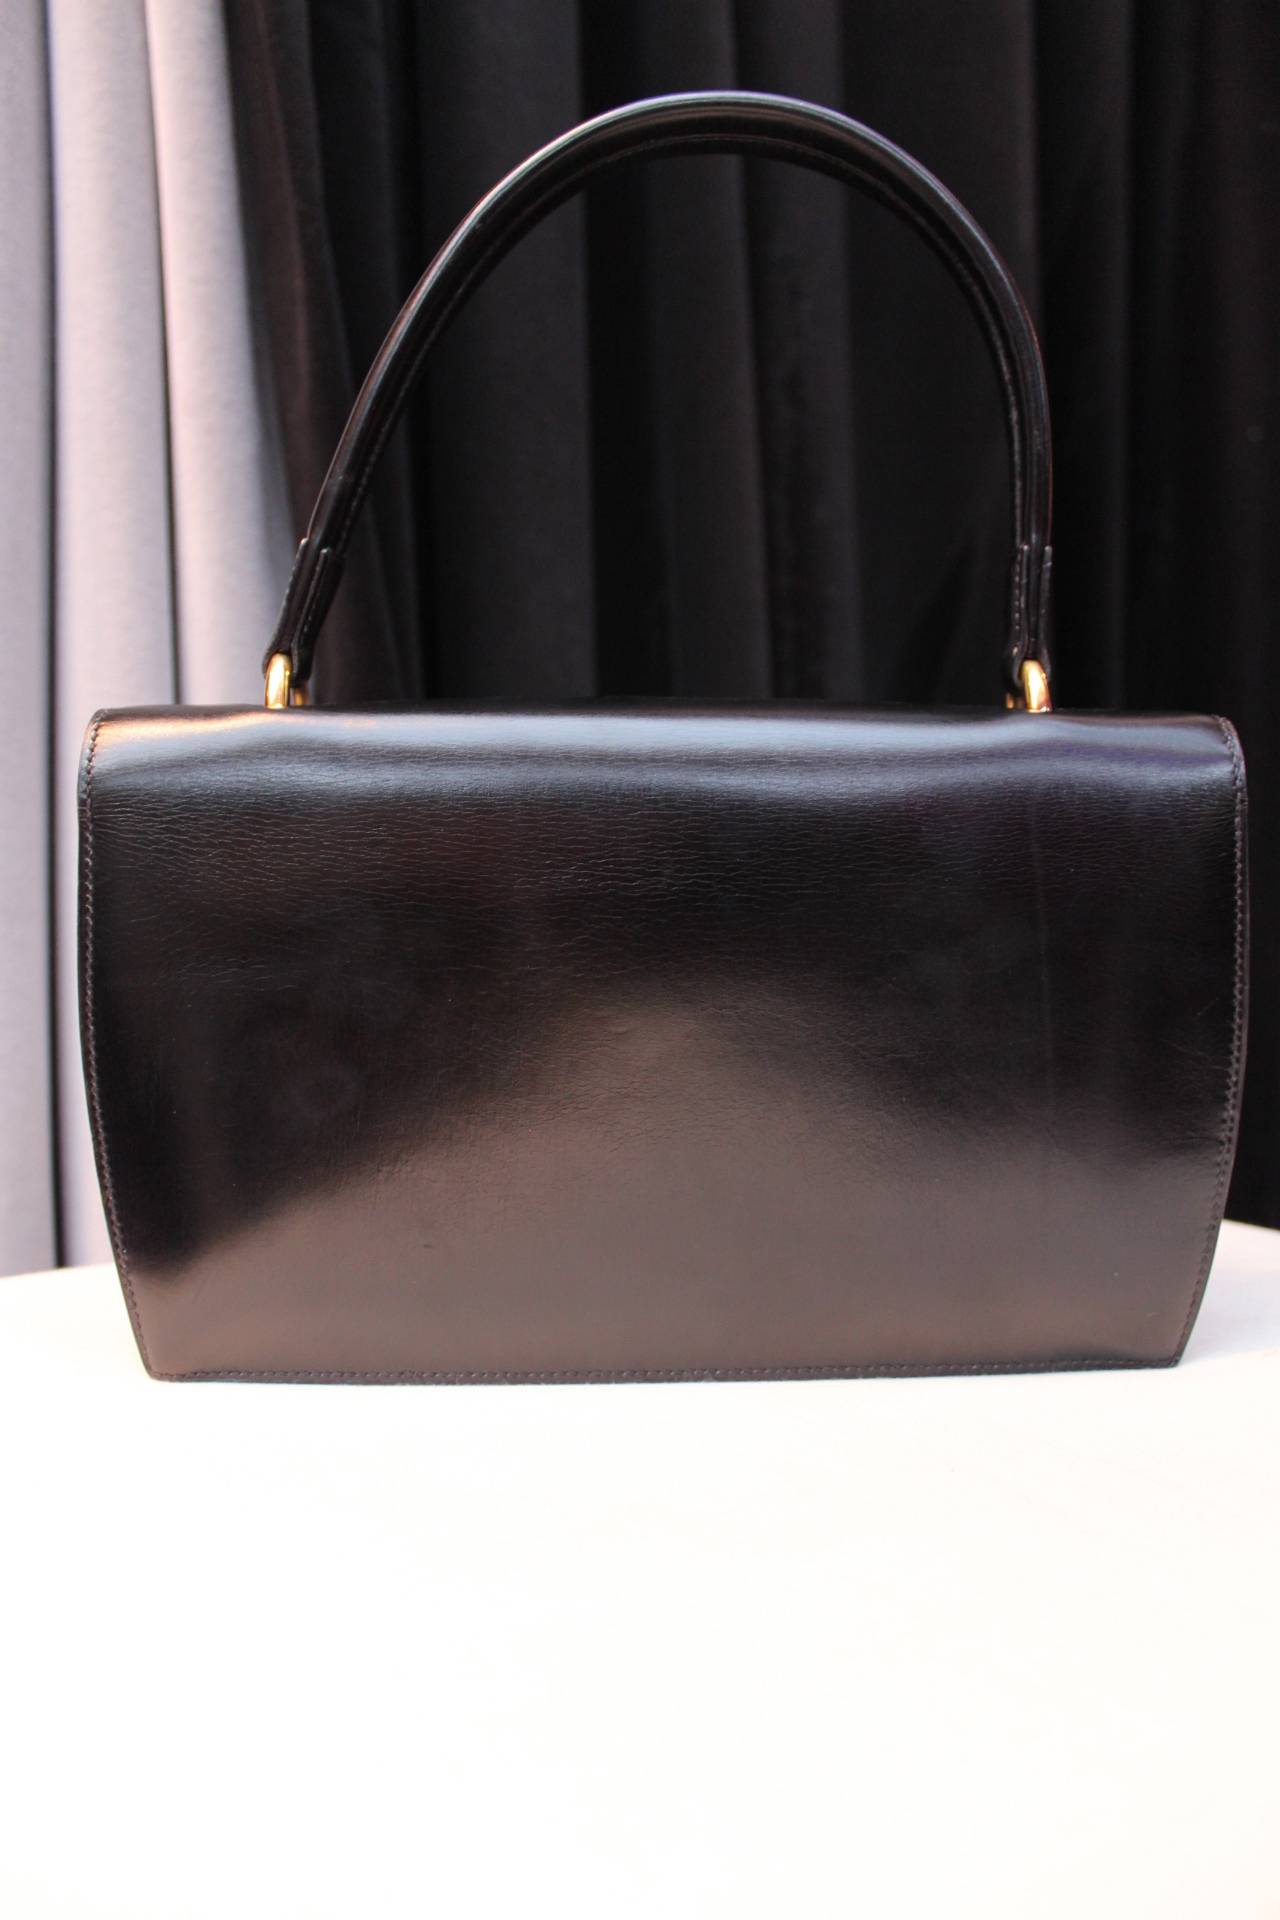 HERMES ( Paris) Rectangular black leather handbag from the 1960's centered with a gold plated metal clasp and held by a single handle.

The inner lining is composed of black lambskin leather. It includes two flaps and four inside pockets,